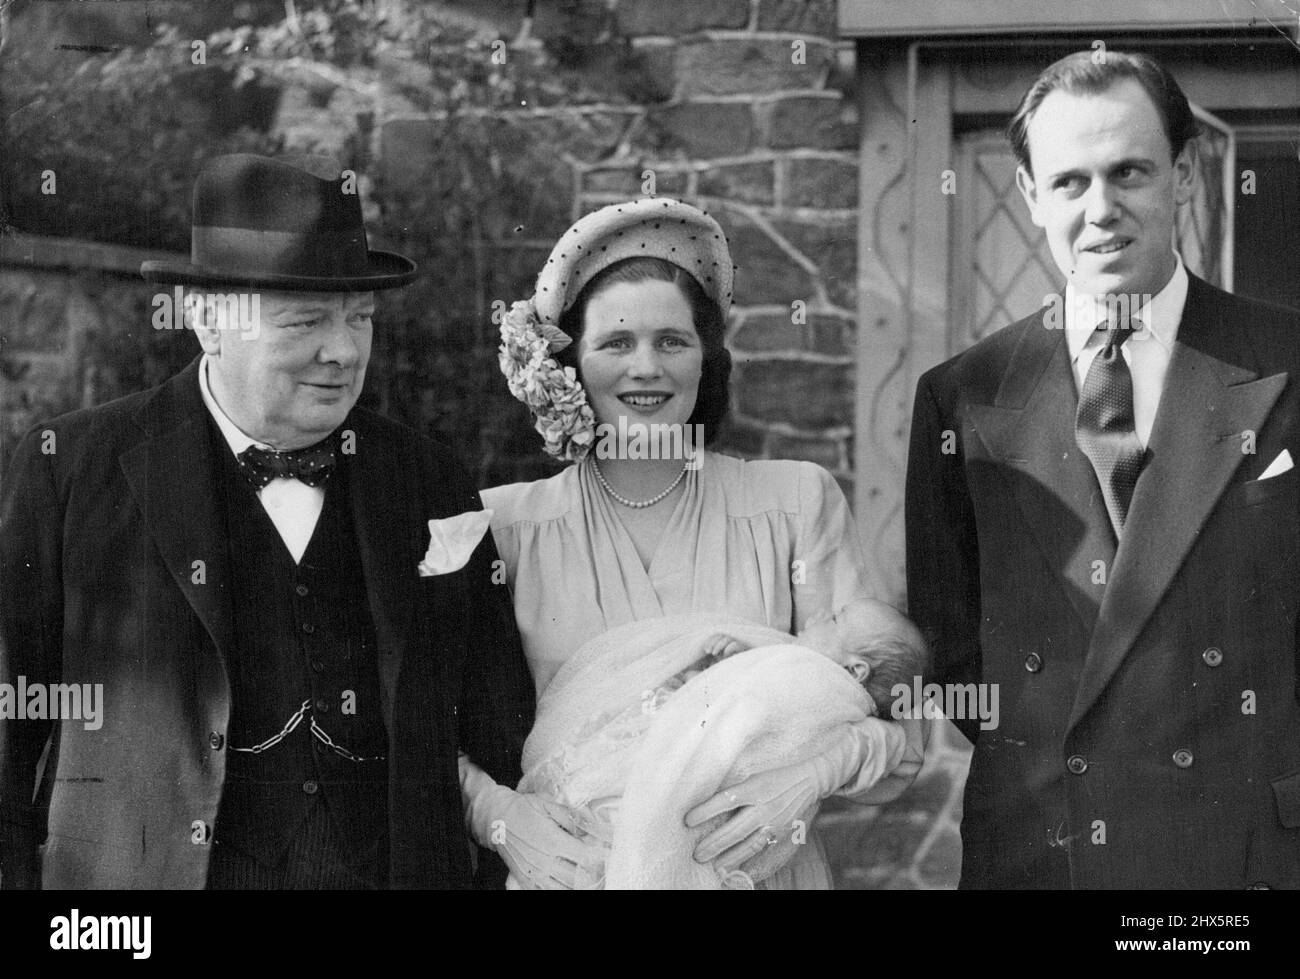 Churchill's Fifth Grandchild Christening -- Captain and Mrs. Christopher Soames, Mr. Winston Churchill and newly-christened Arthur Nicholas Winston Soames pictured at the Christening party which followed the service at Westerham to-day. (Sunday). Mr. and Mrs. Winston Churchill were present at Westerham Church, Kent, to-day (Easter Sunday) for the christening of their grandchild, Arthur Nicholas Winston Soames, first child of their daughter Mary, who in February 1947 was married to Captain Christopher Soames. March 28, 1948. (Photo by Reuterphoto). Stock Photo